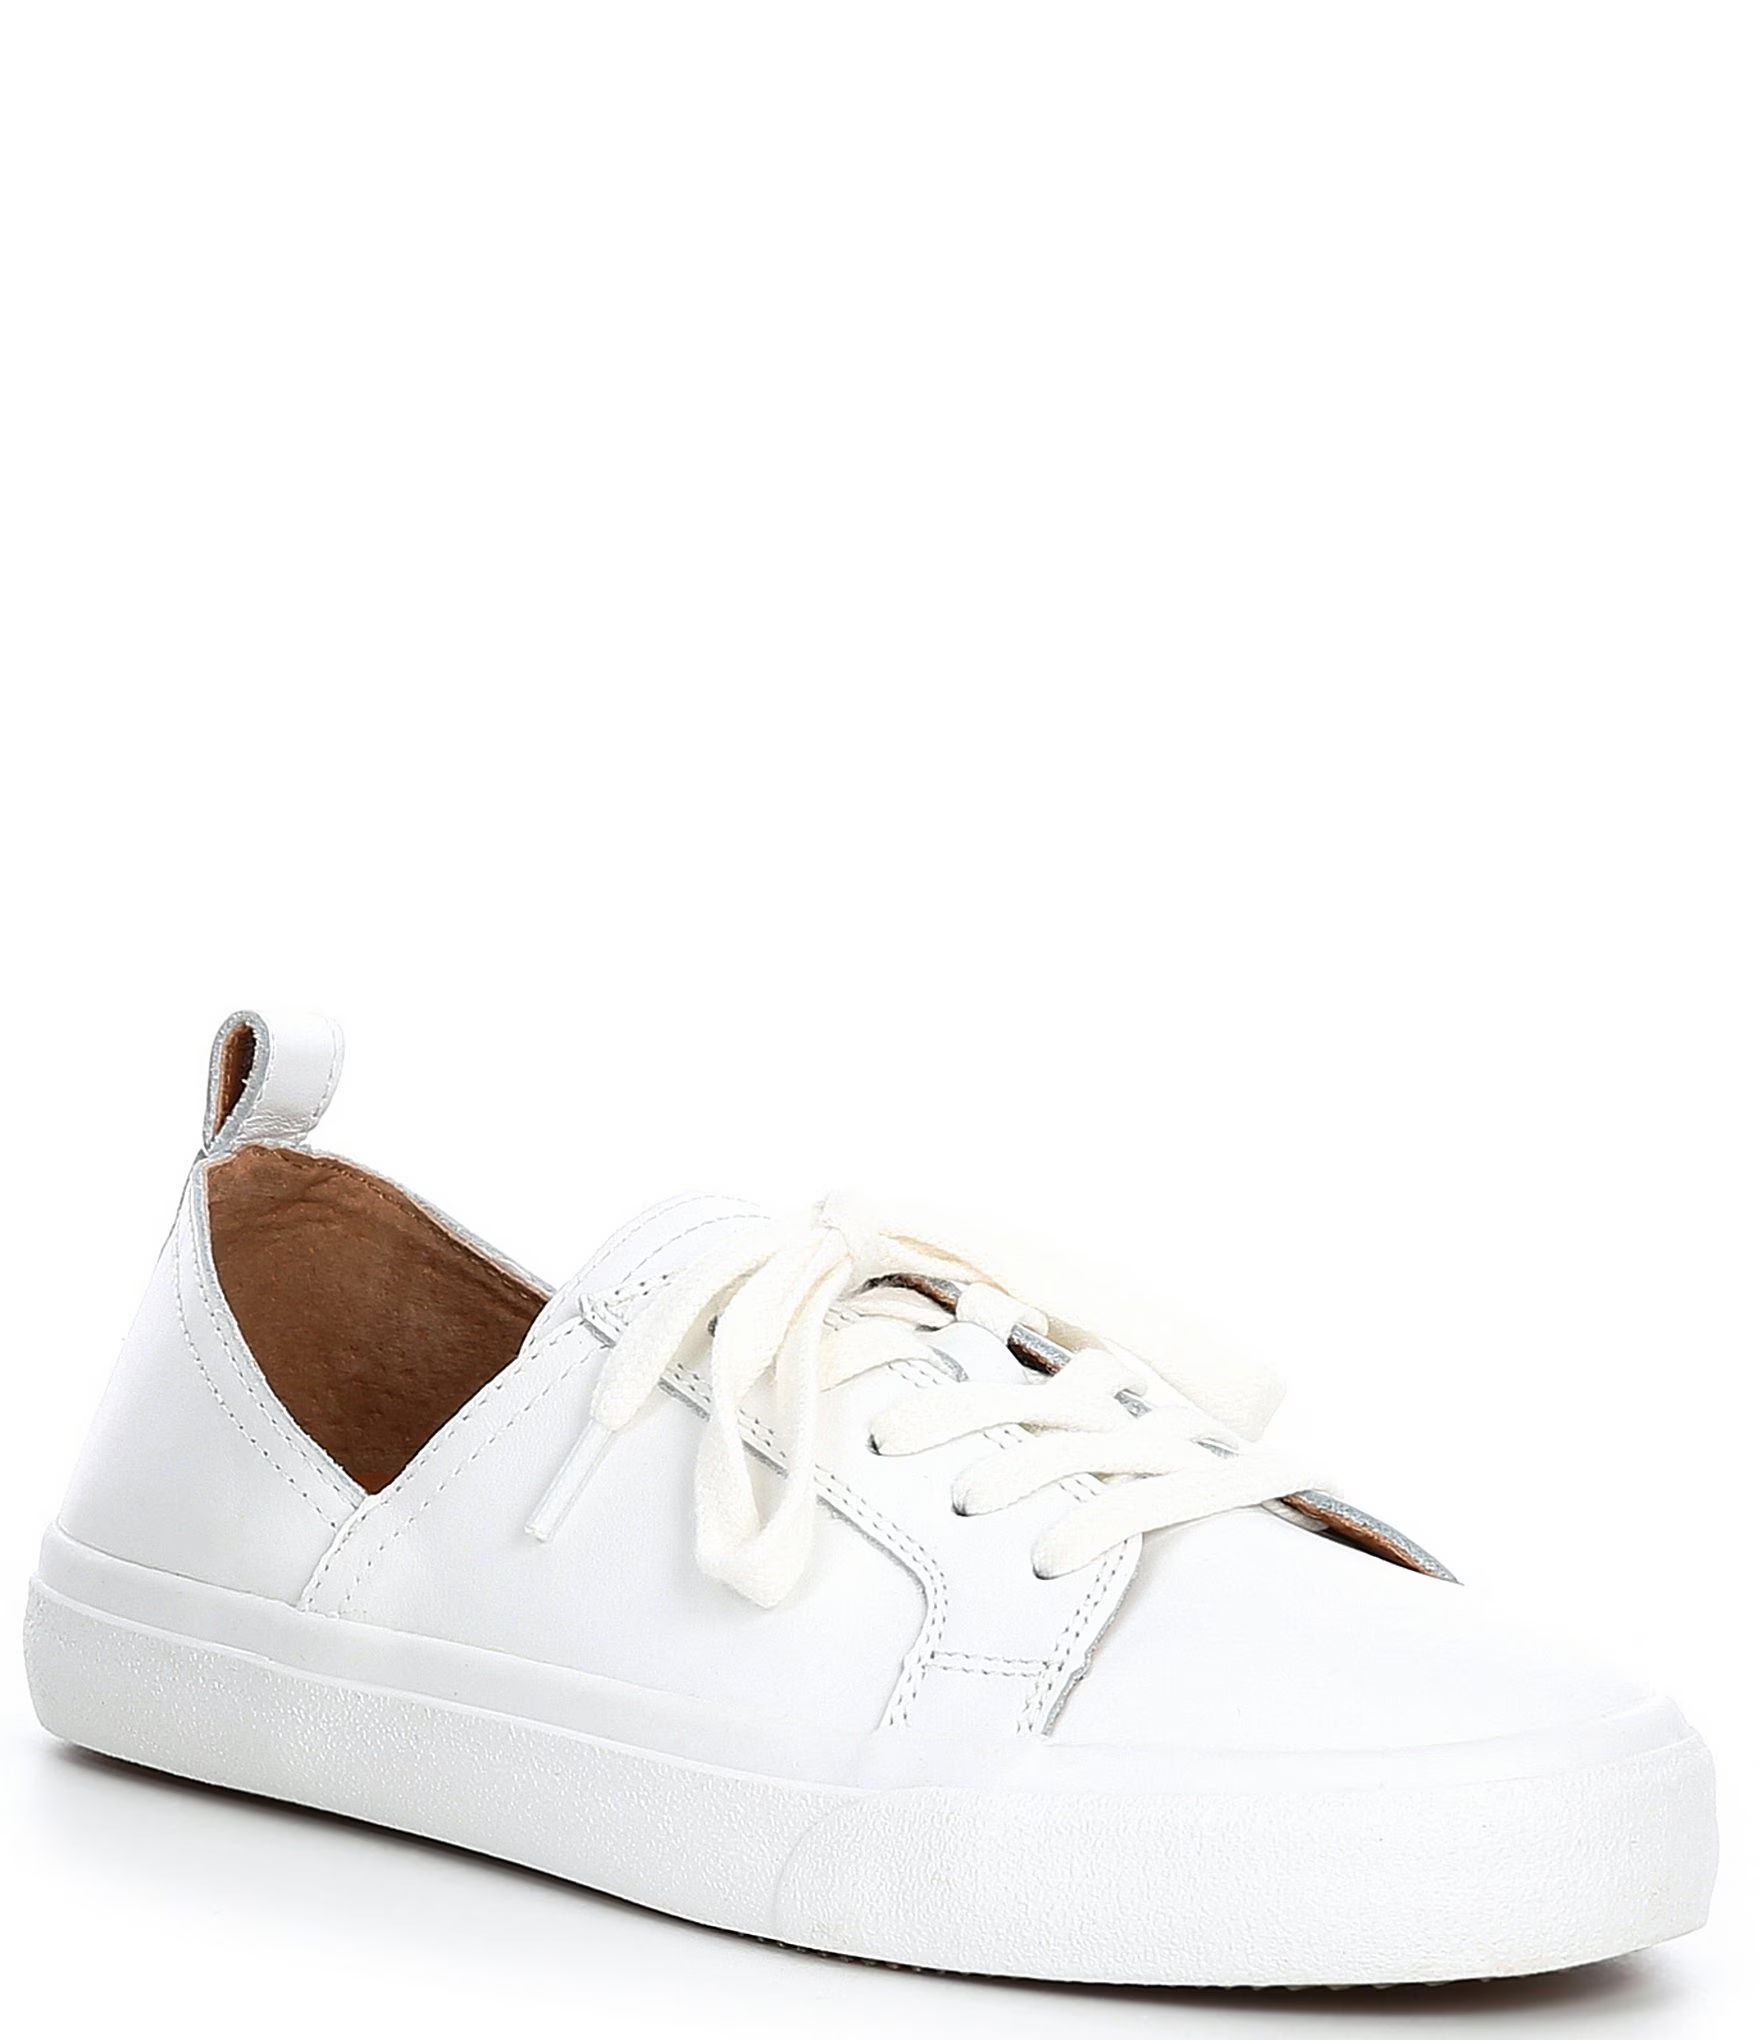 Dansbey Leather Side Dip Lace-Up Sneakers | Dillards